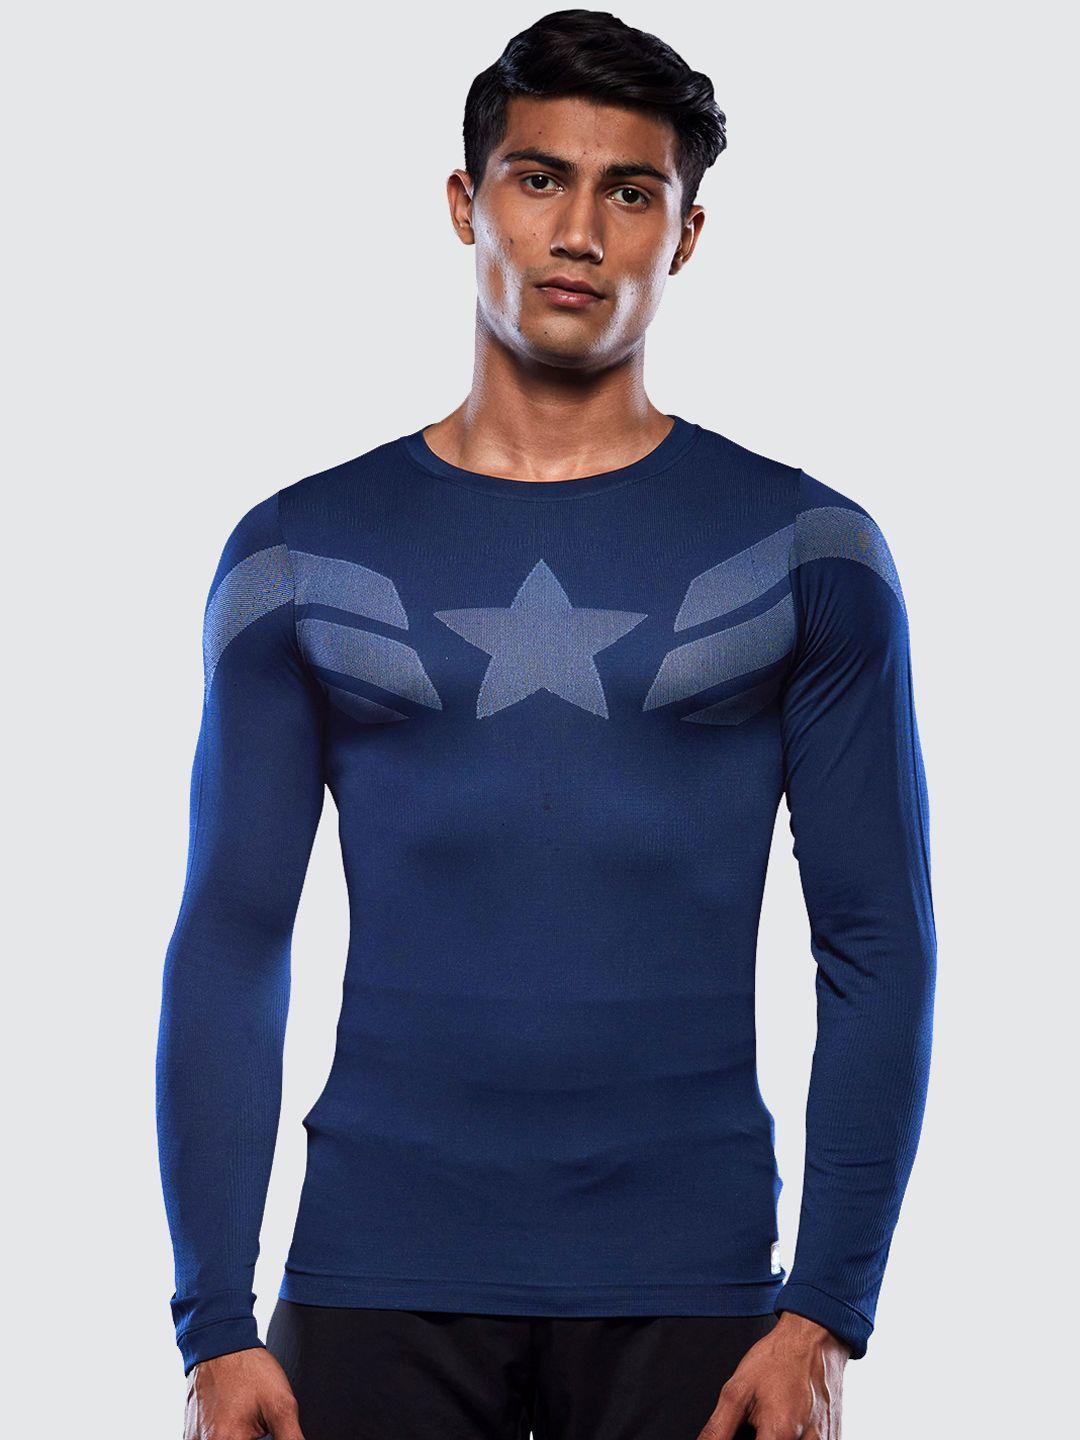 the-souled-store-men-blue-captain-america-printed-t-shirt-base-layer-active-sports-wear